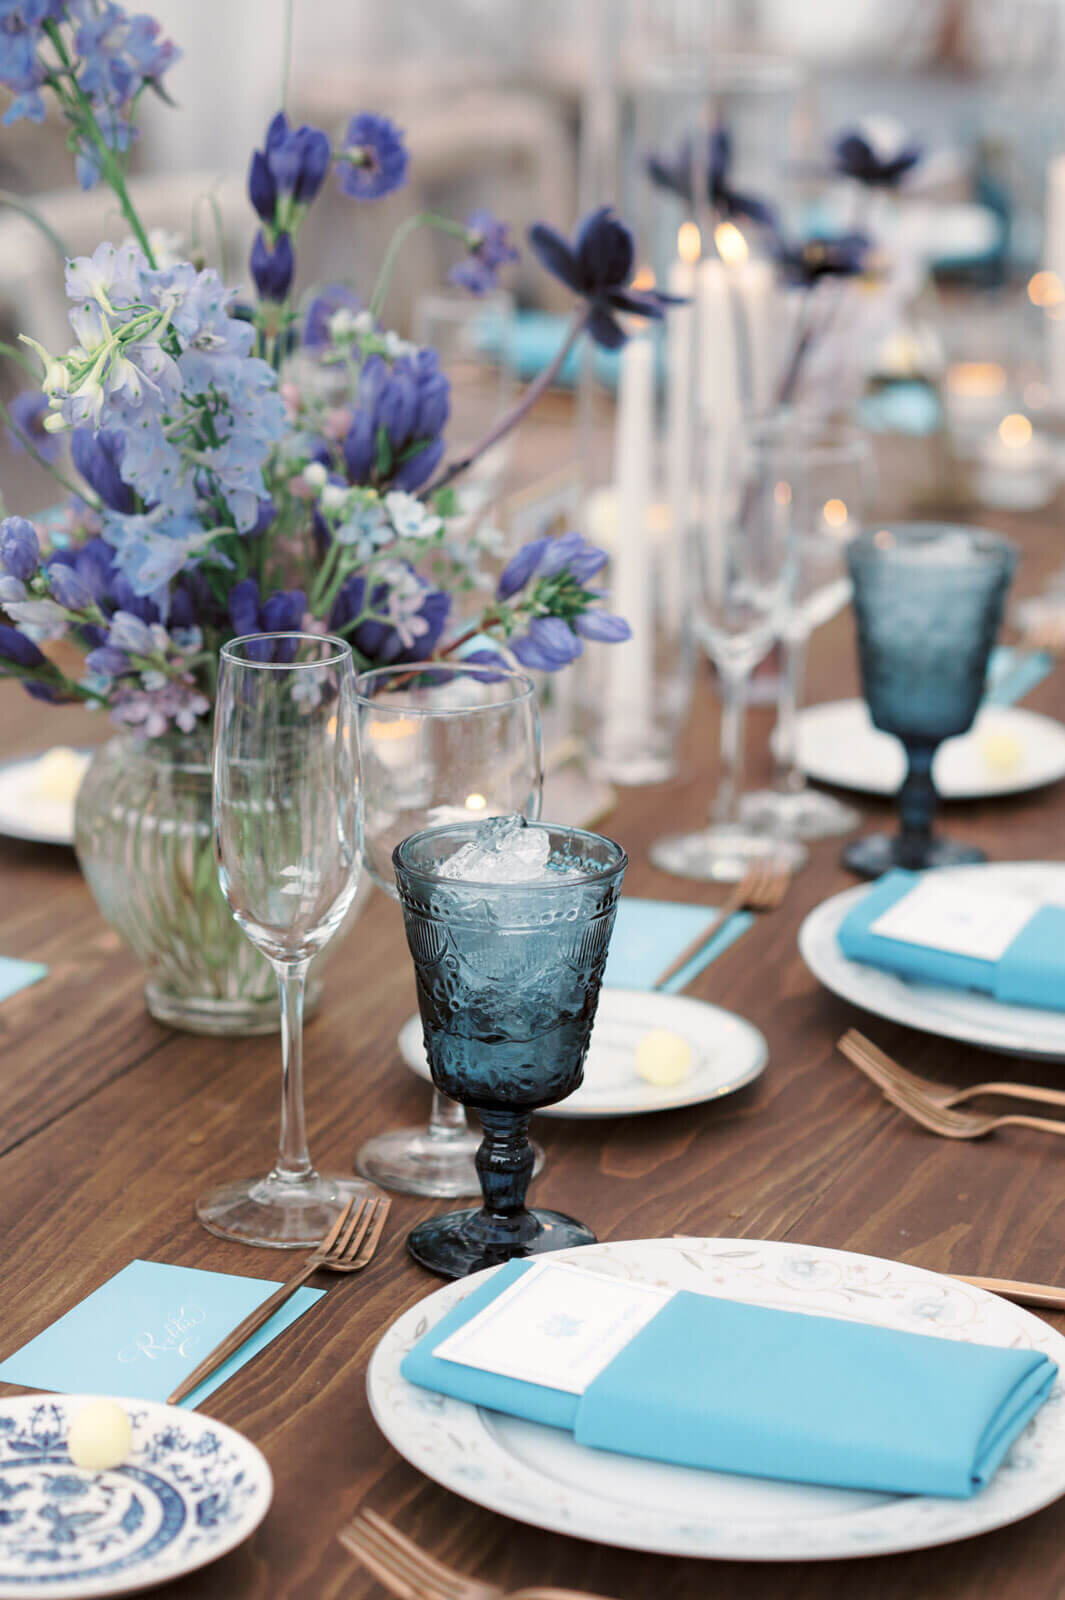 An elegant wedding reception dining table with flowers, napkins, and wine glasses in shades of blue at The Ausable Club, NY. Image by Jenny Fu Studio